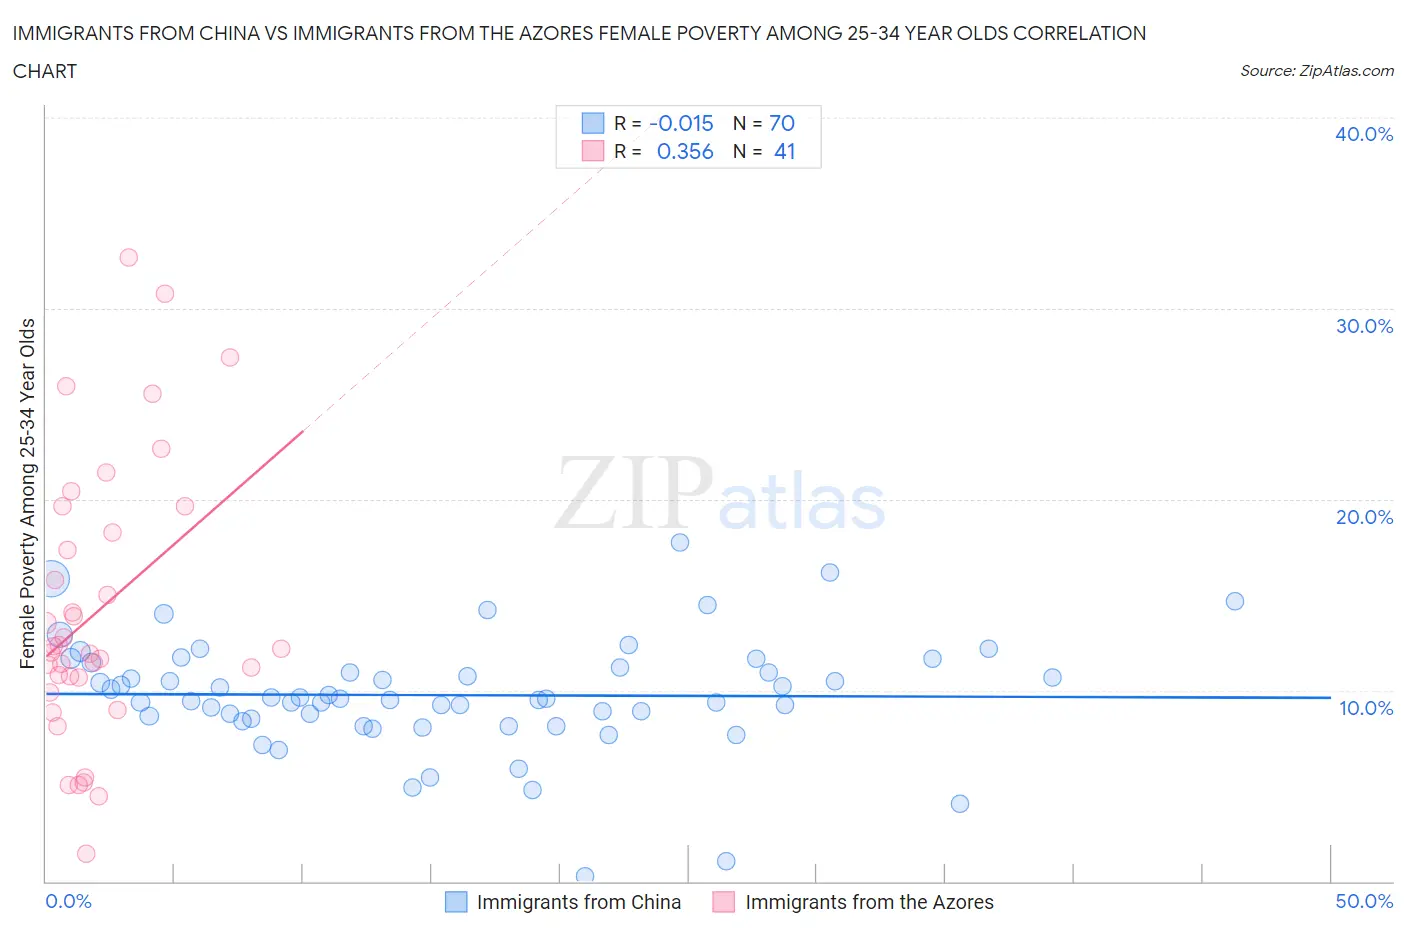 Immigrants from China vs Immigrants from the Azores Female Poverty Among 25-34 Year Olds